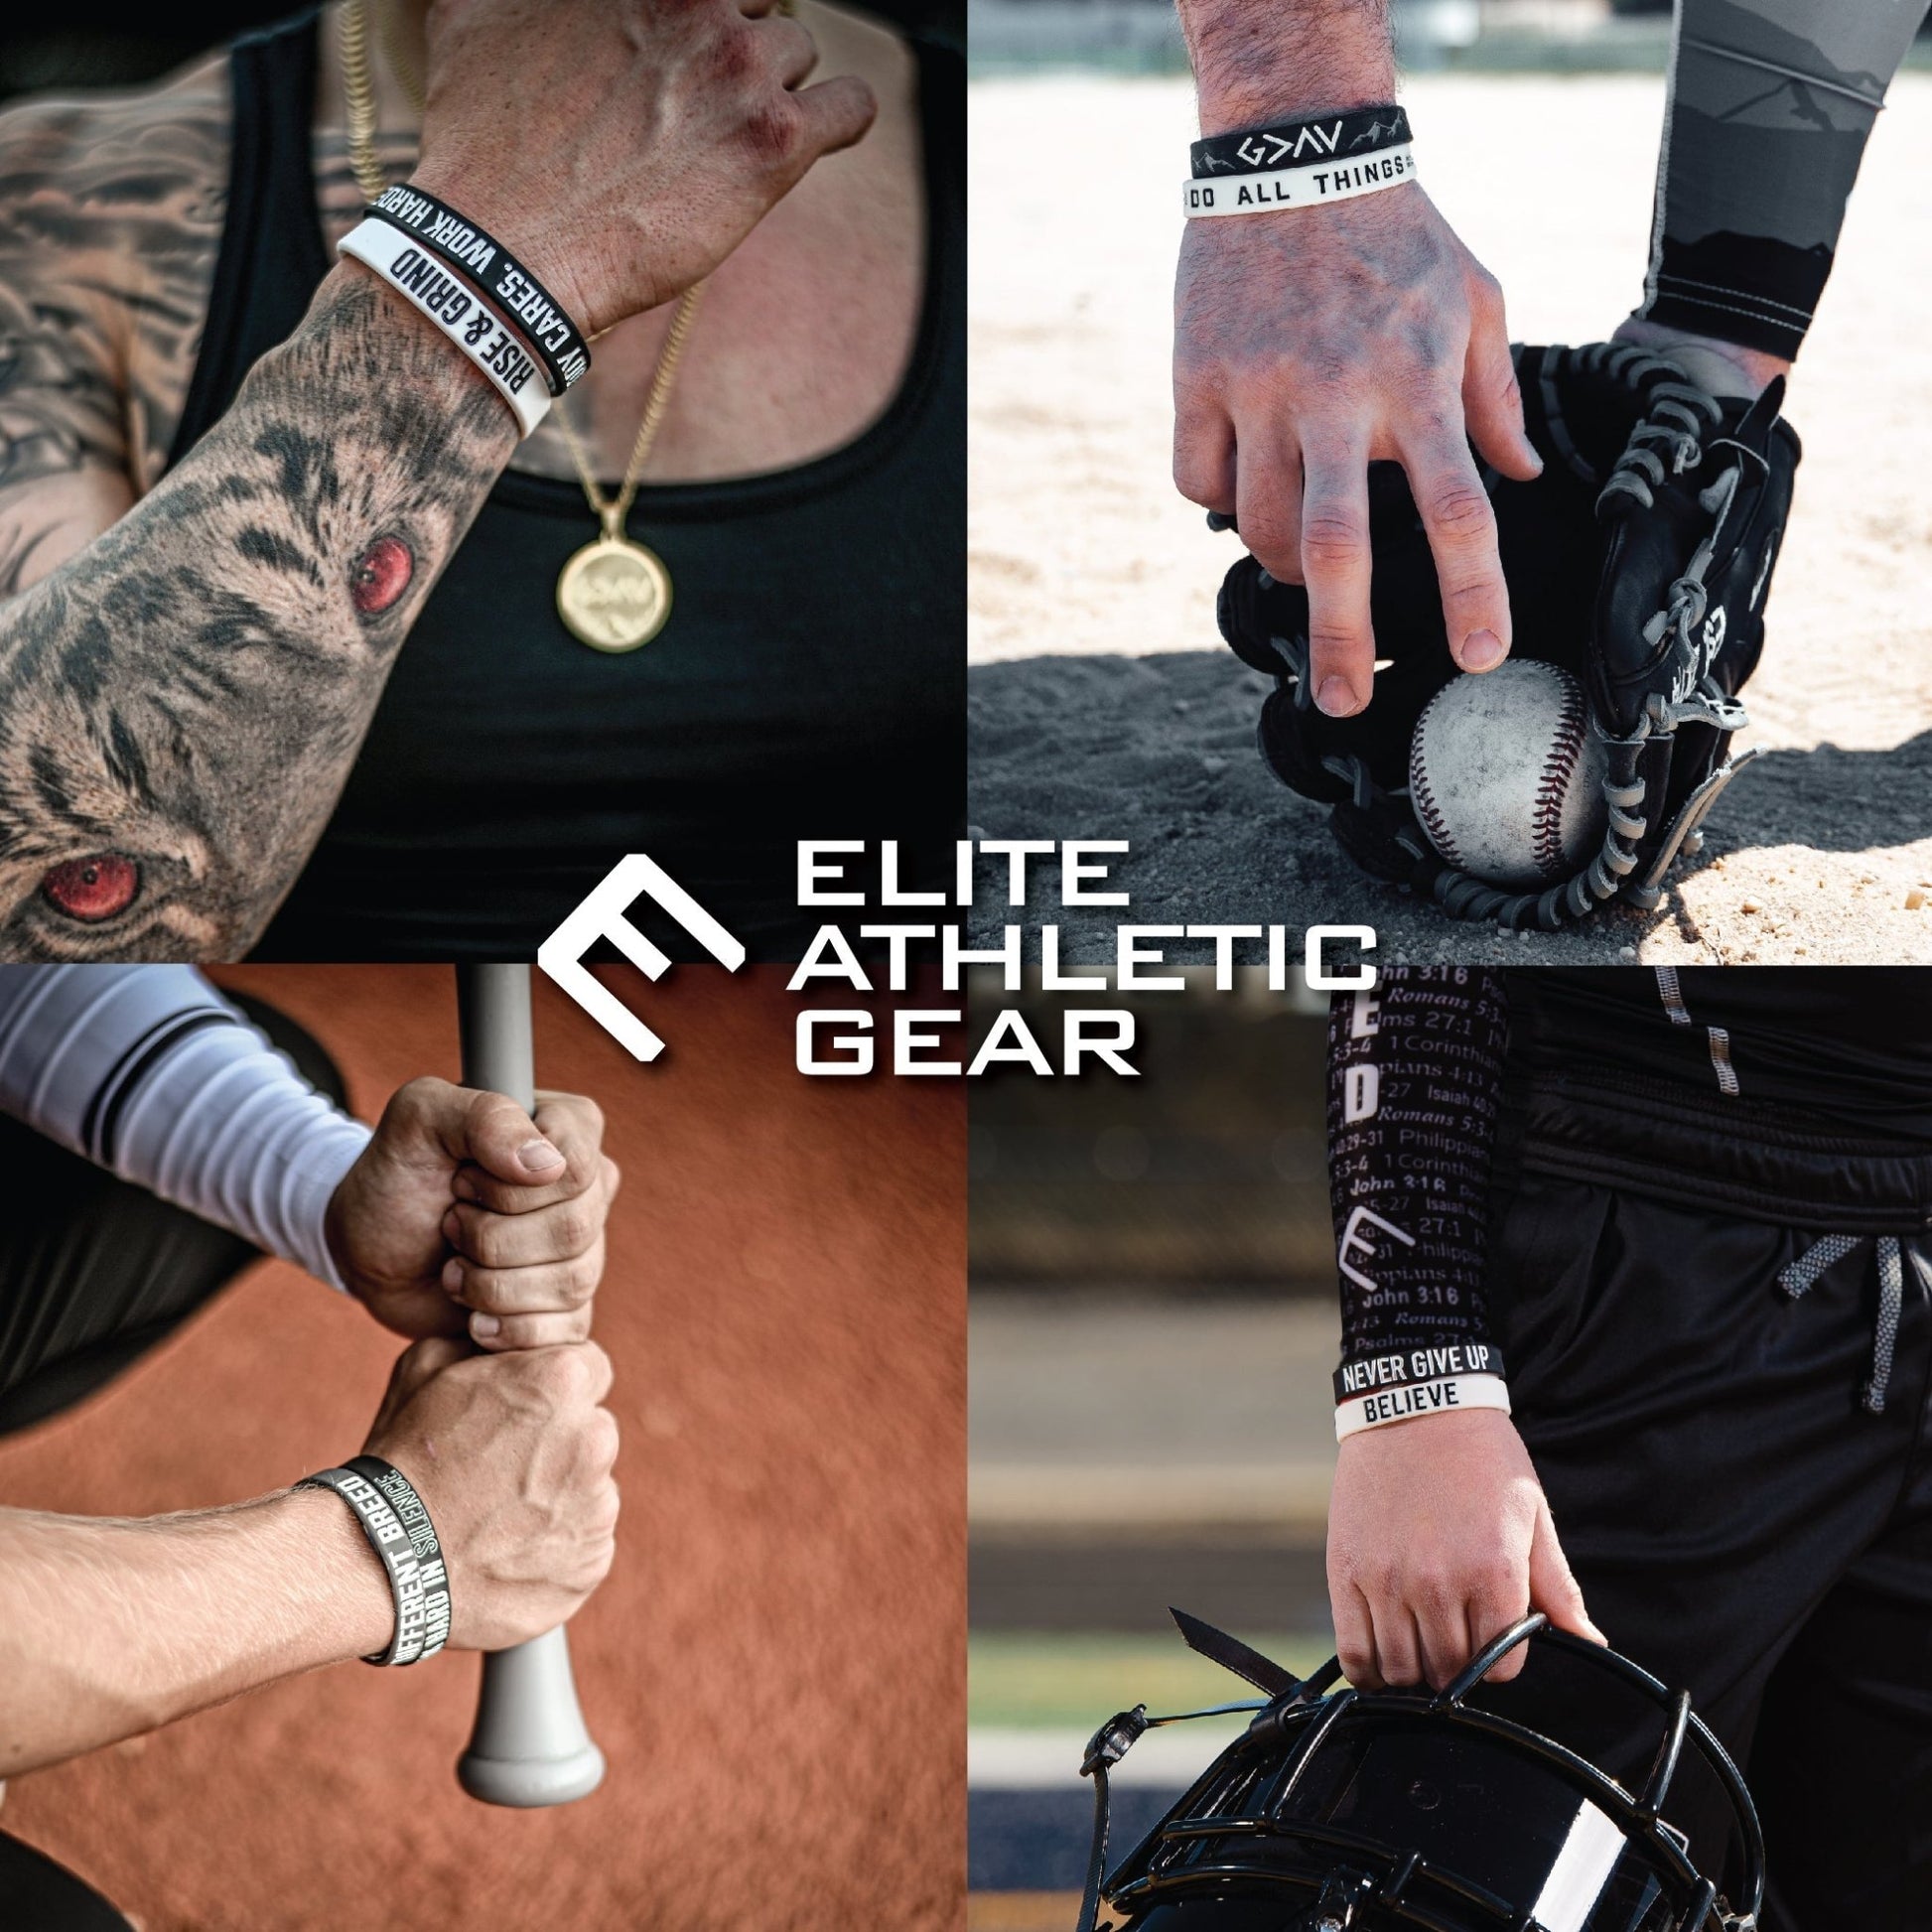 ALL IN. NO EXCUSES. Wristband - Maximum Velocity Sports